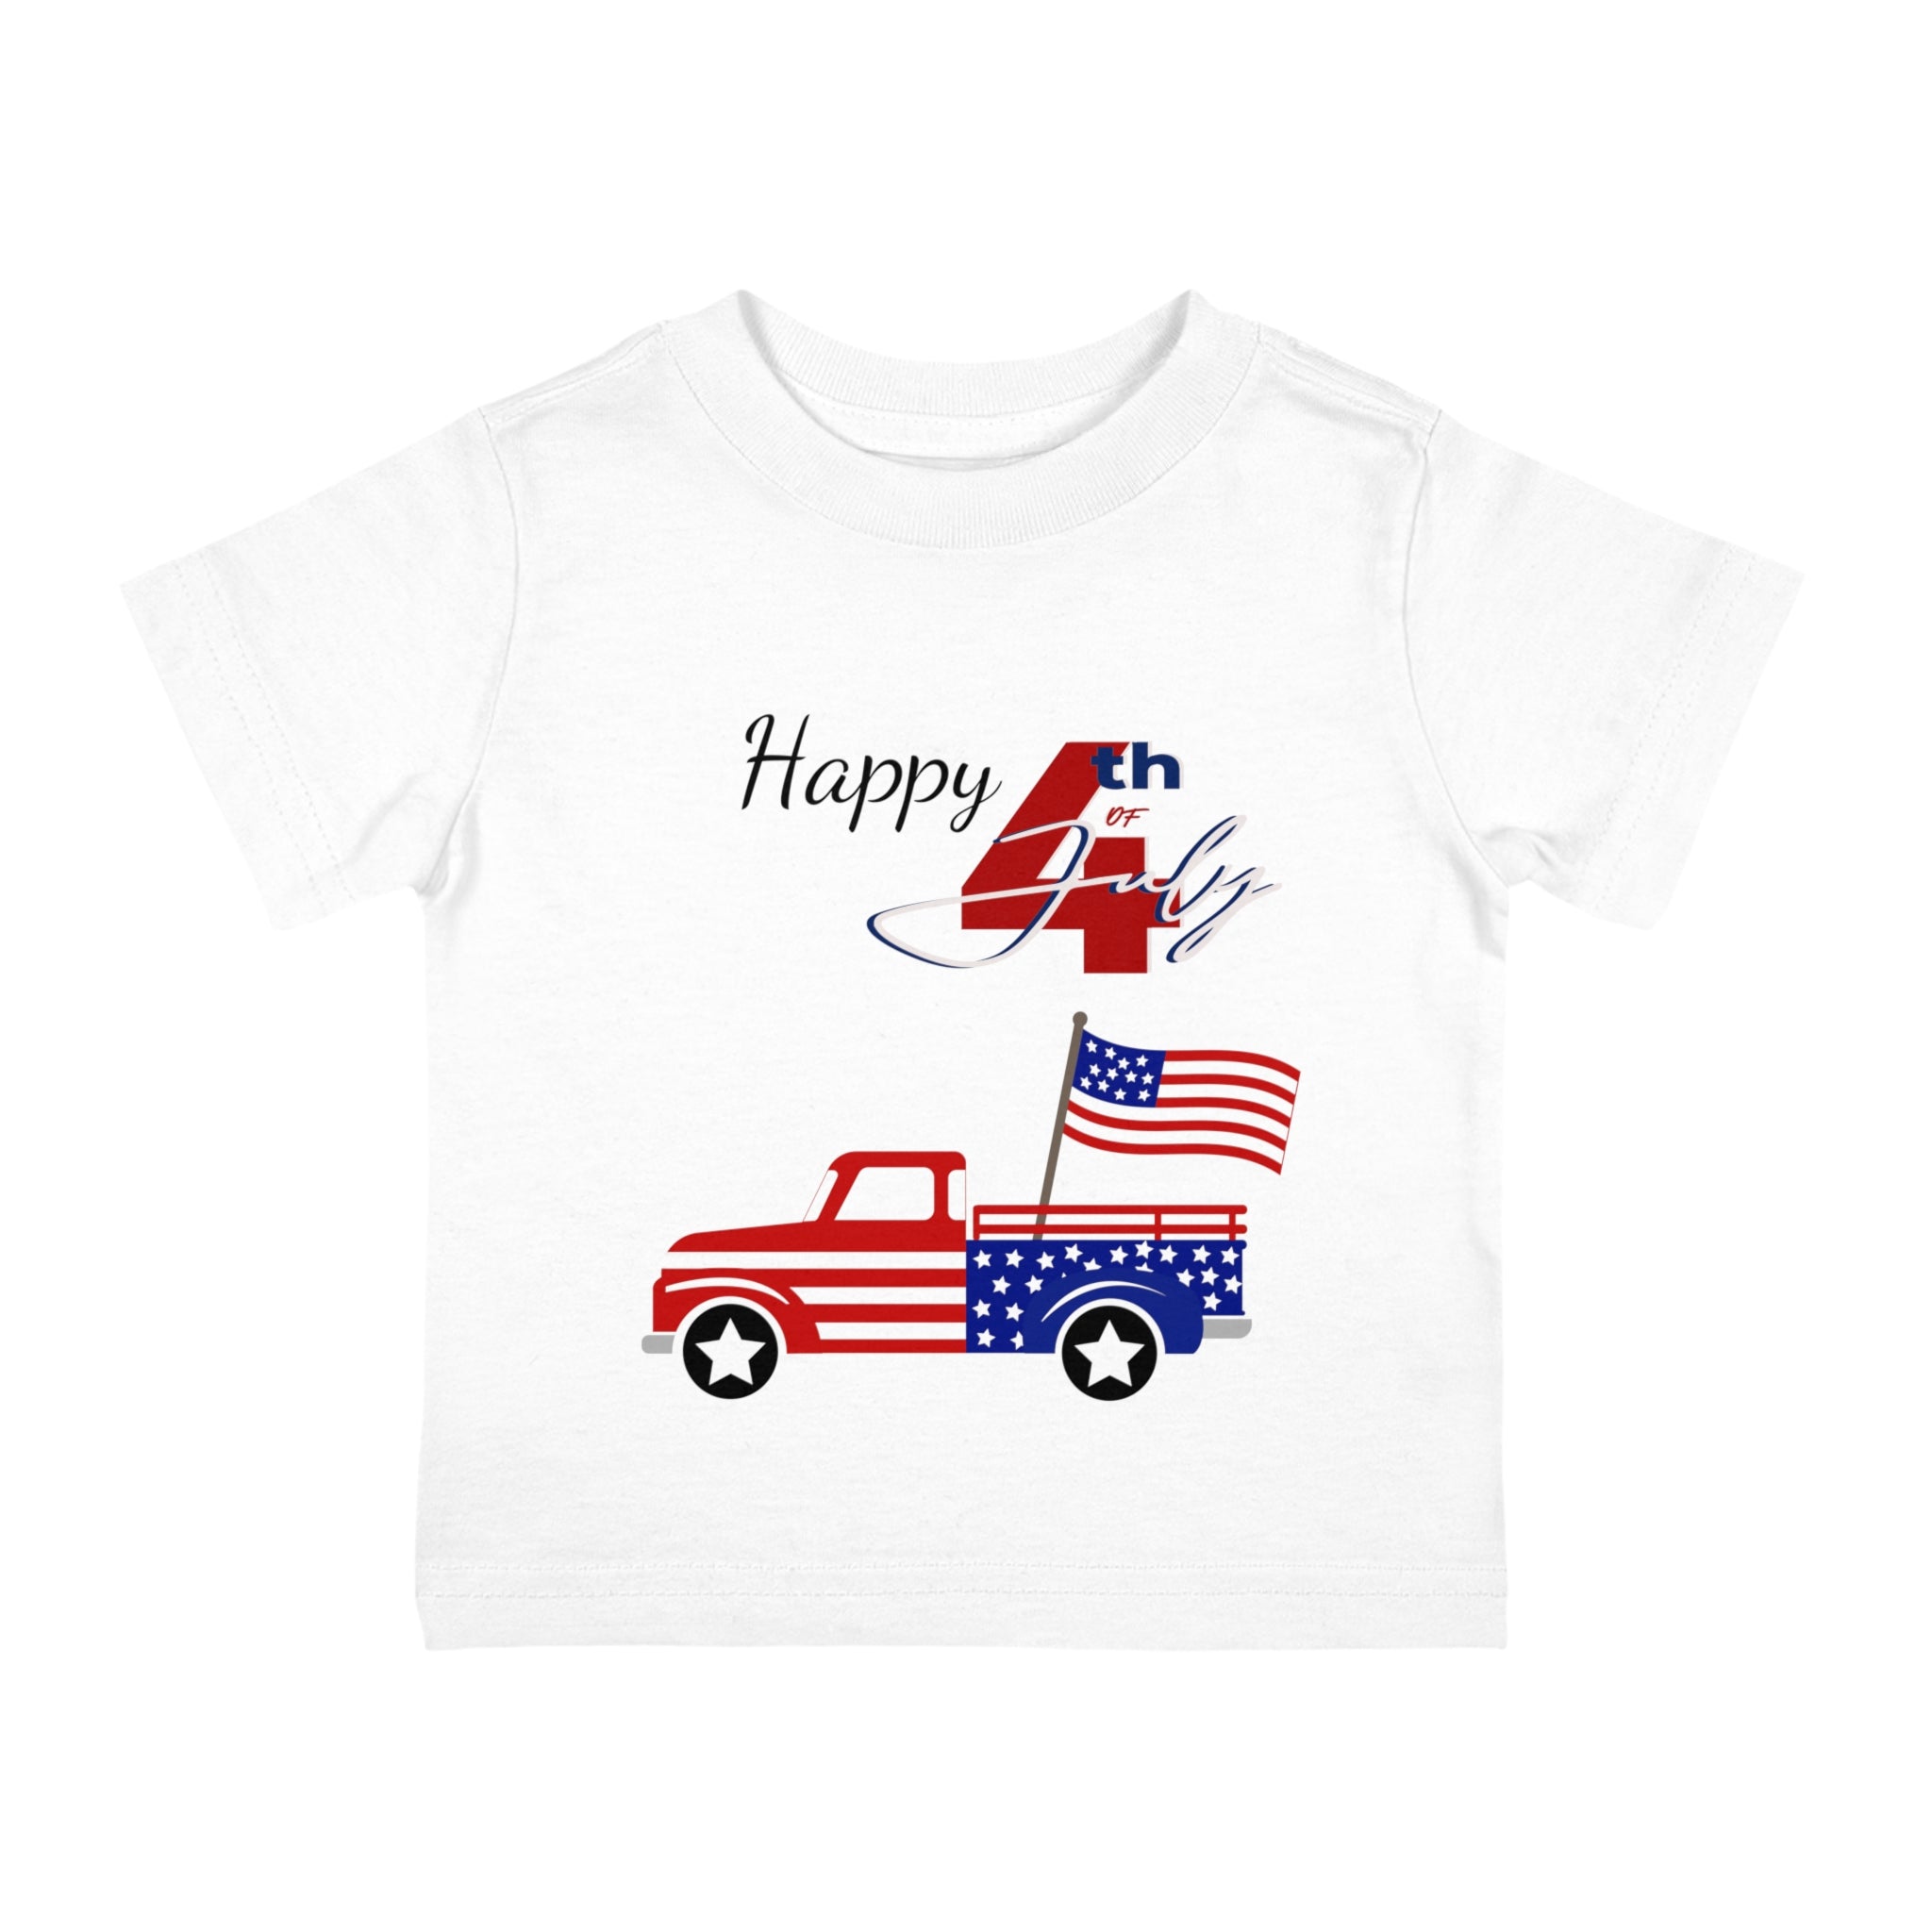 Happy 4th of July American Flag design Truck Infant Shirt, Baby Tee, Infant Tee